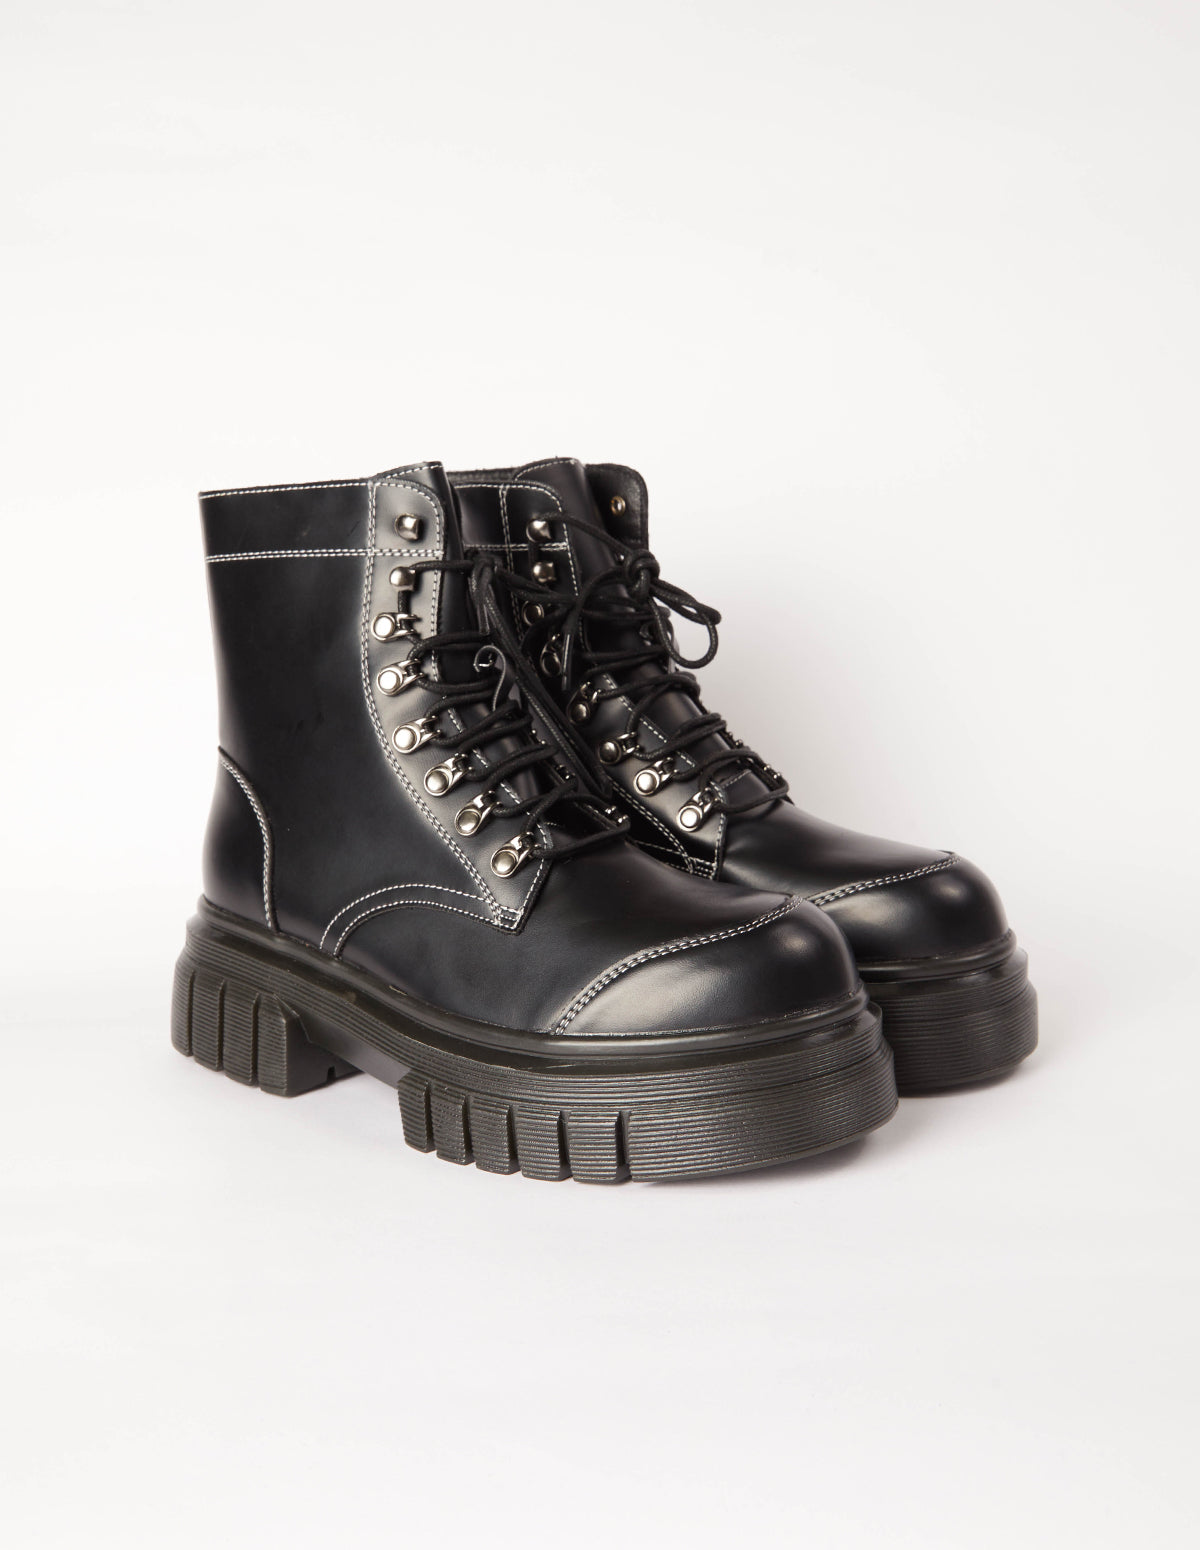 PU Lace Up Combat Style Boots 